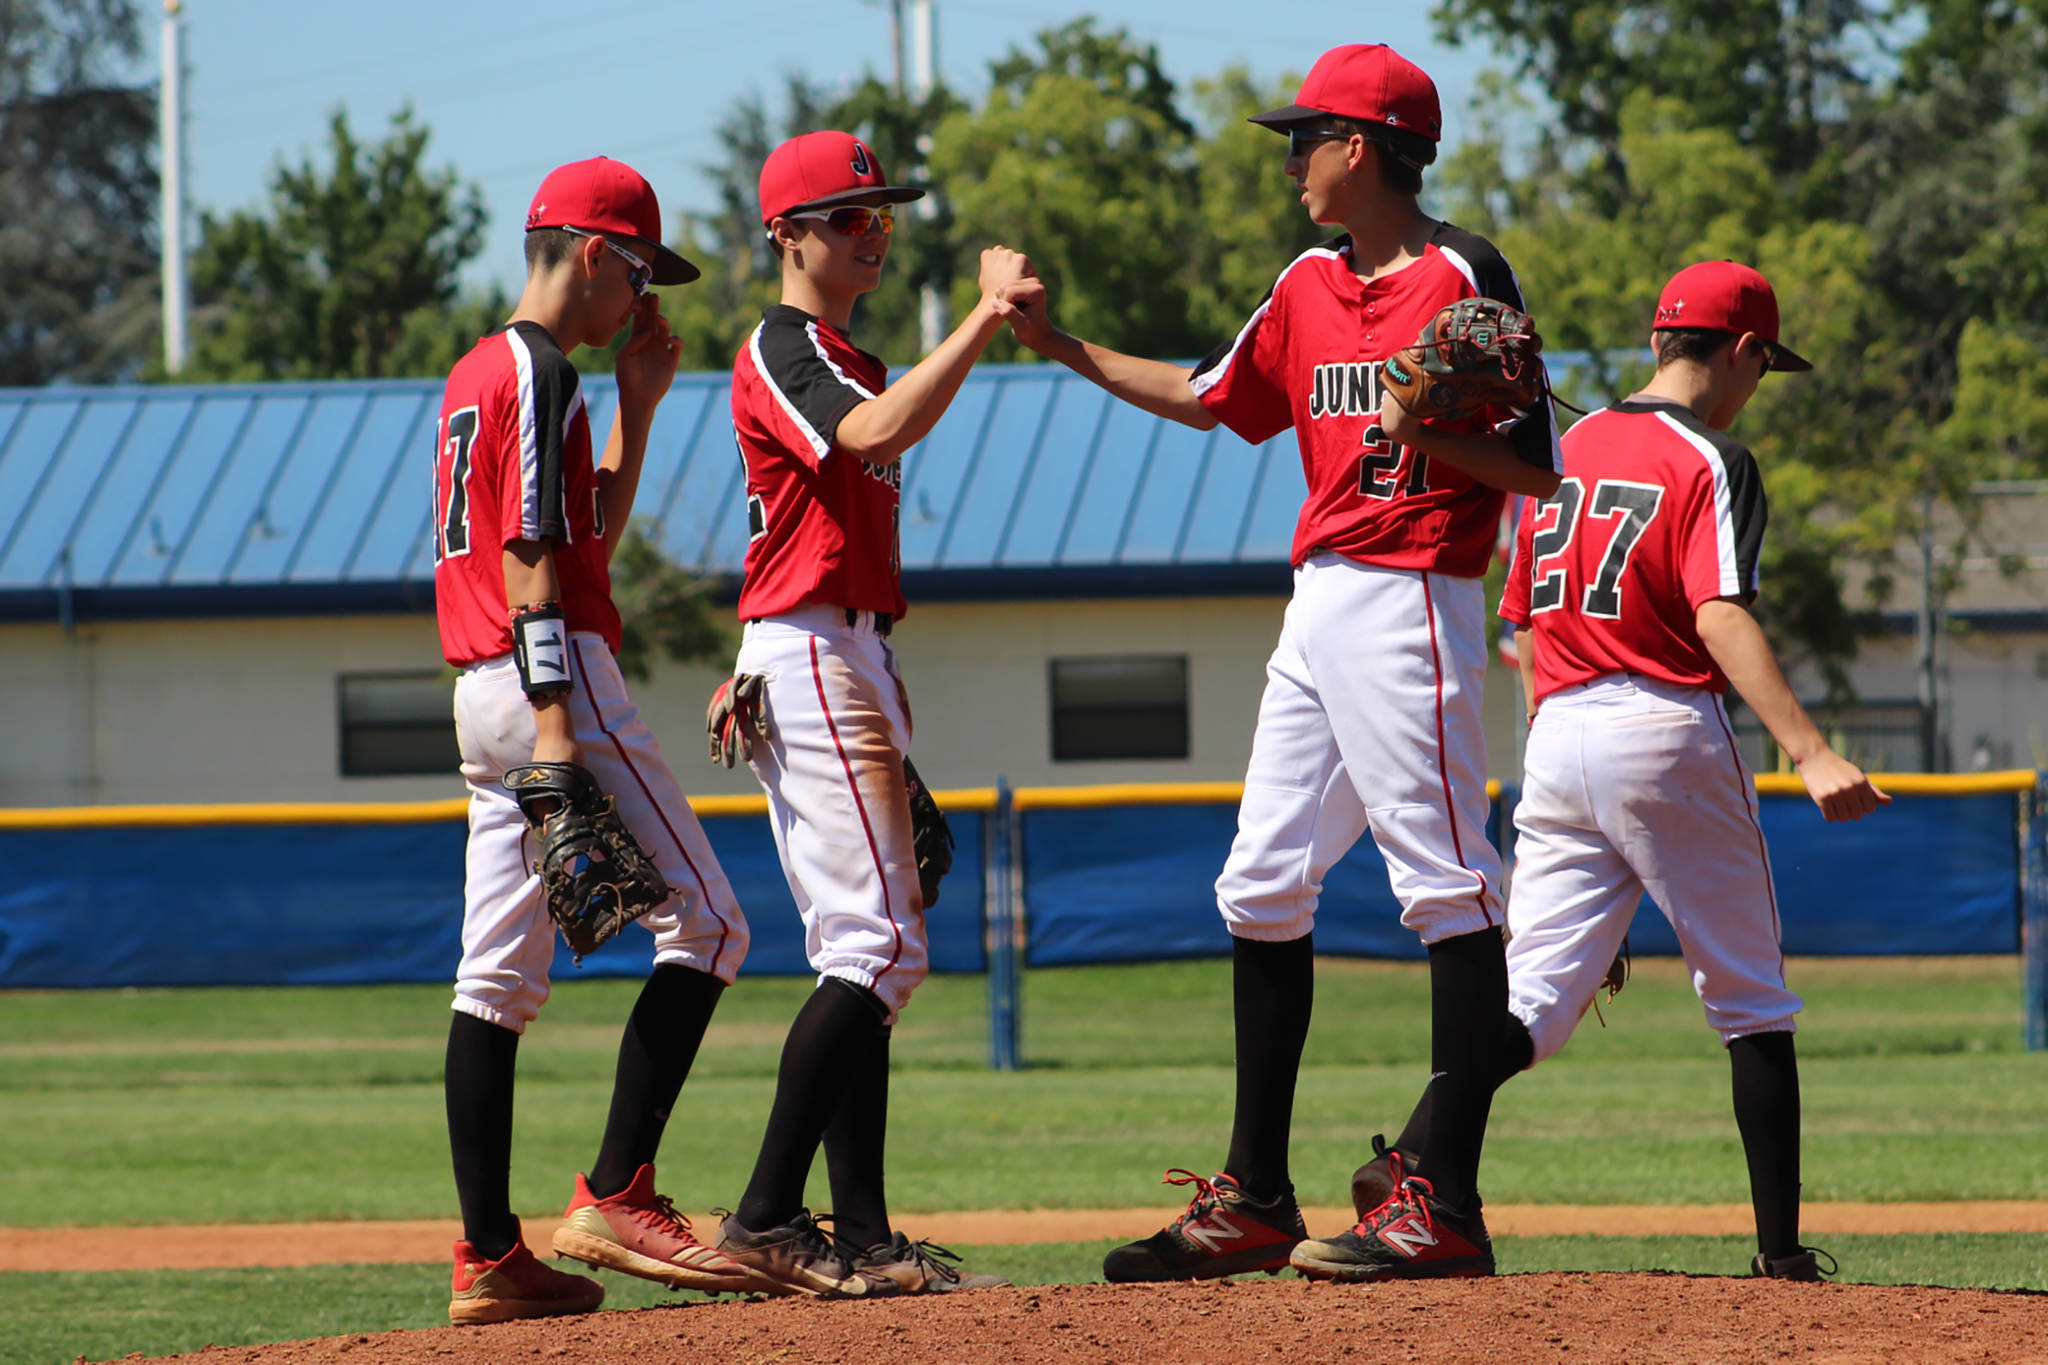 Gastineau Channel Little League Junior All-Star Joe Aline receives encouragement from his teammates in a game against La Grande Little League in the West Regional Tournament at Ida Price Middle School in San Jose, California, on Saturday, July 27, 2019. Juneau lost 10-1. (Courtesy Photo | Lori Crupi)